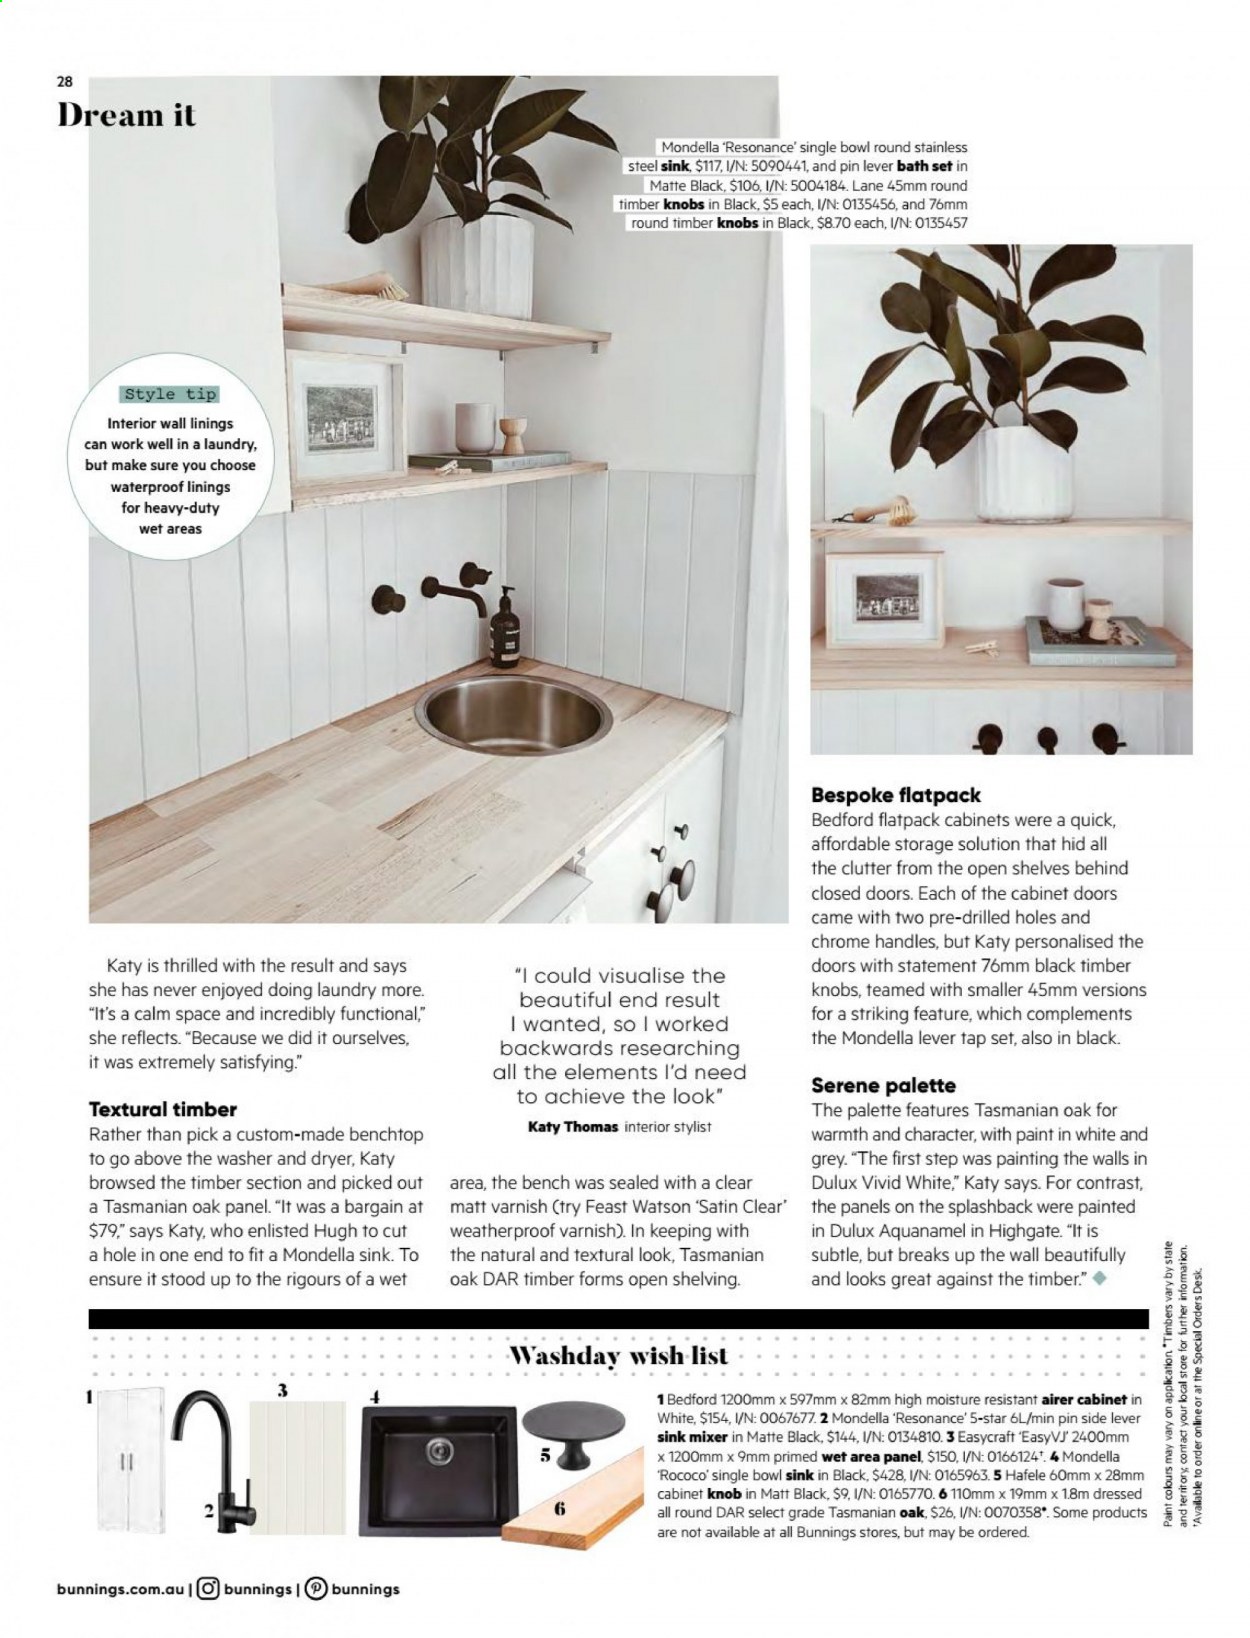 thumbnail - Bunnings Warehouse mailer - 01.02.2021 - 28.02.2021 - Sales products - cabinet, shelves, stainless steel sink, airer, satin sheets, paint, Dulux, door, Hafele. Page 28.